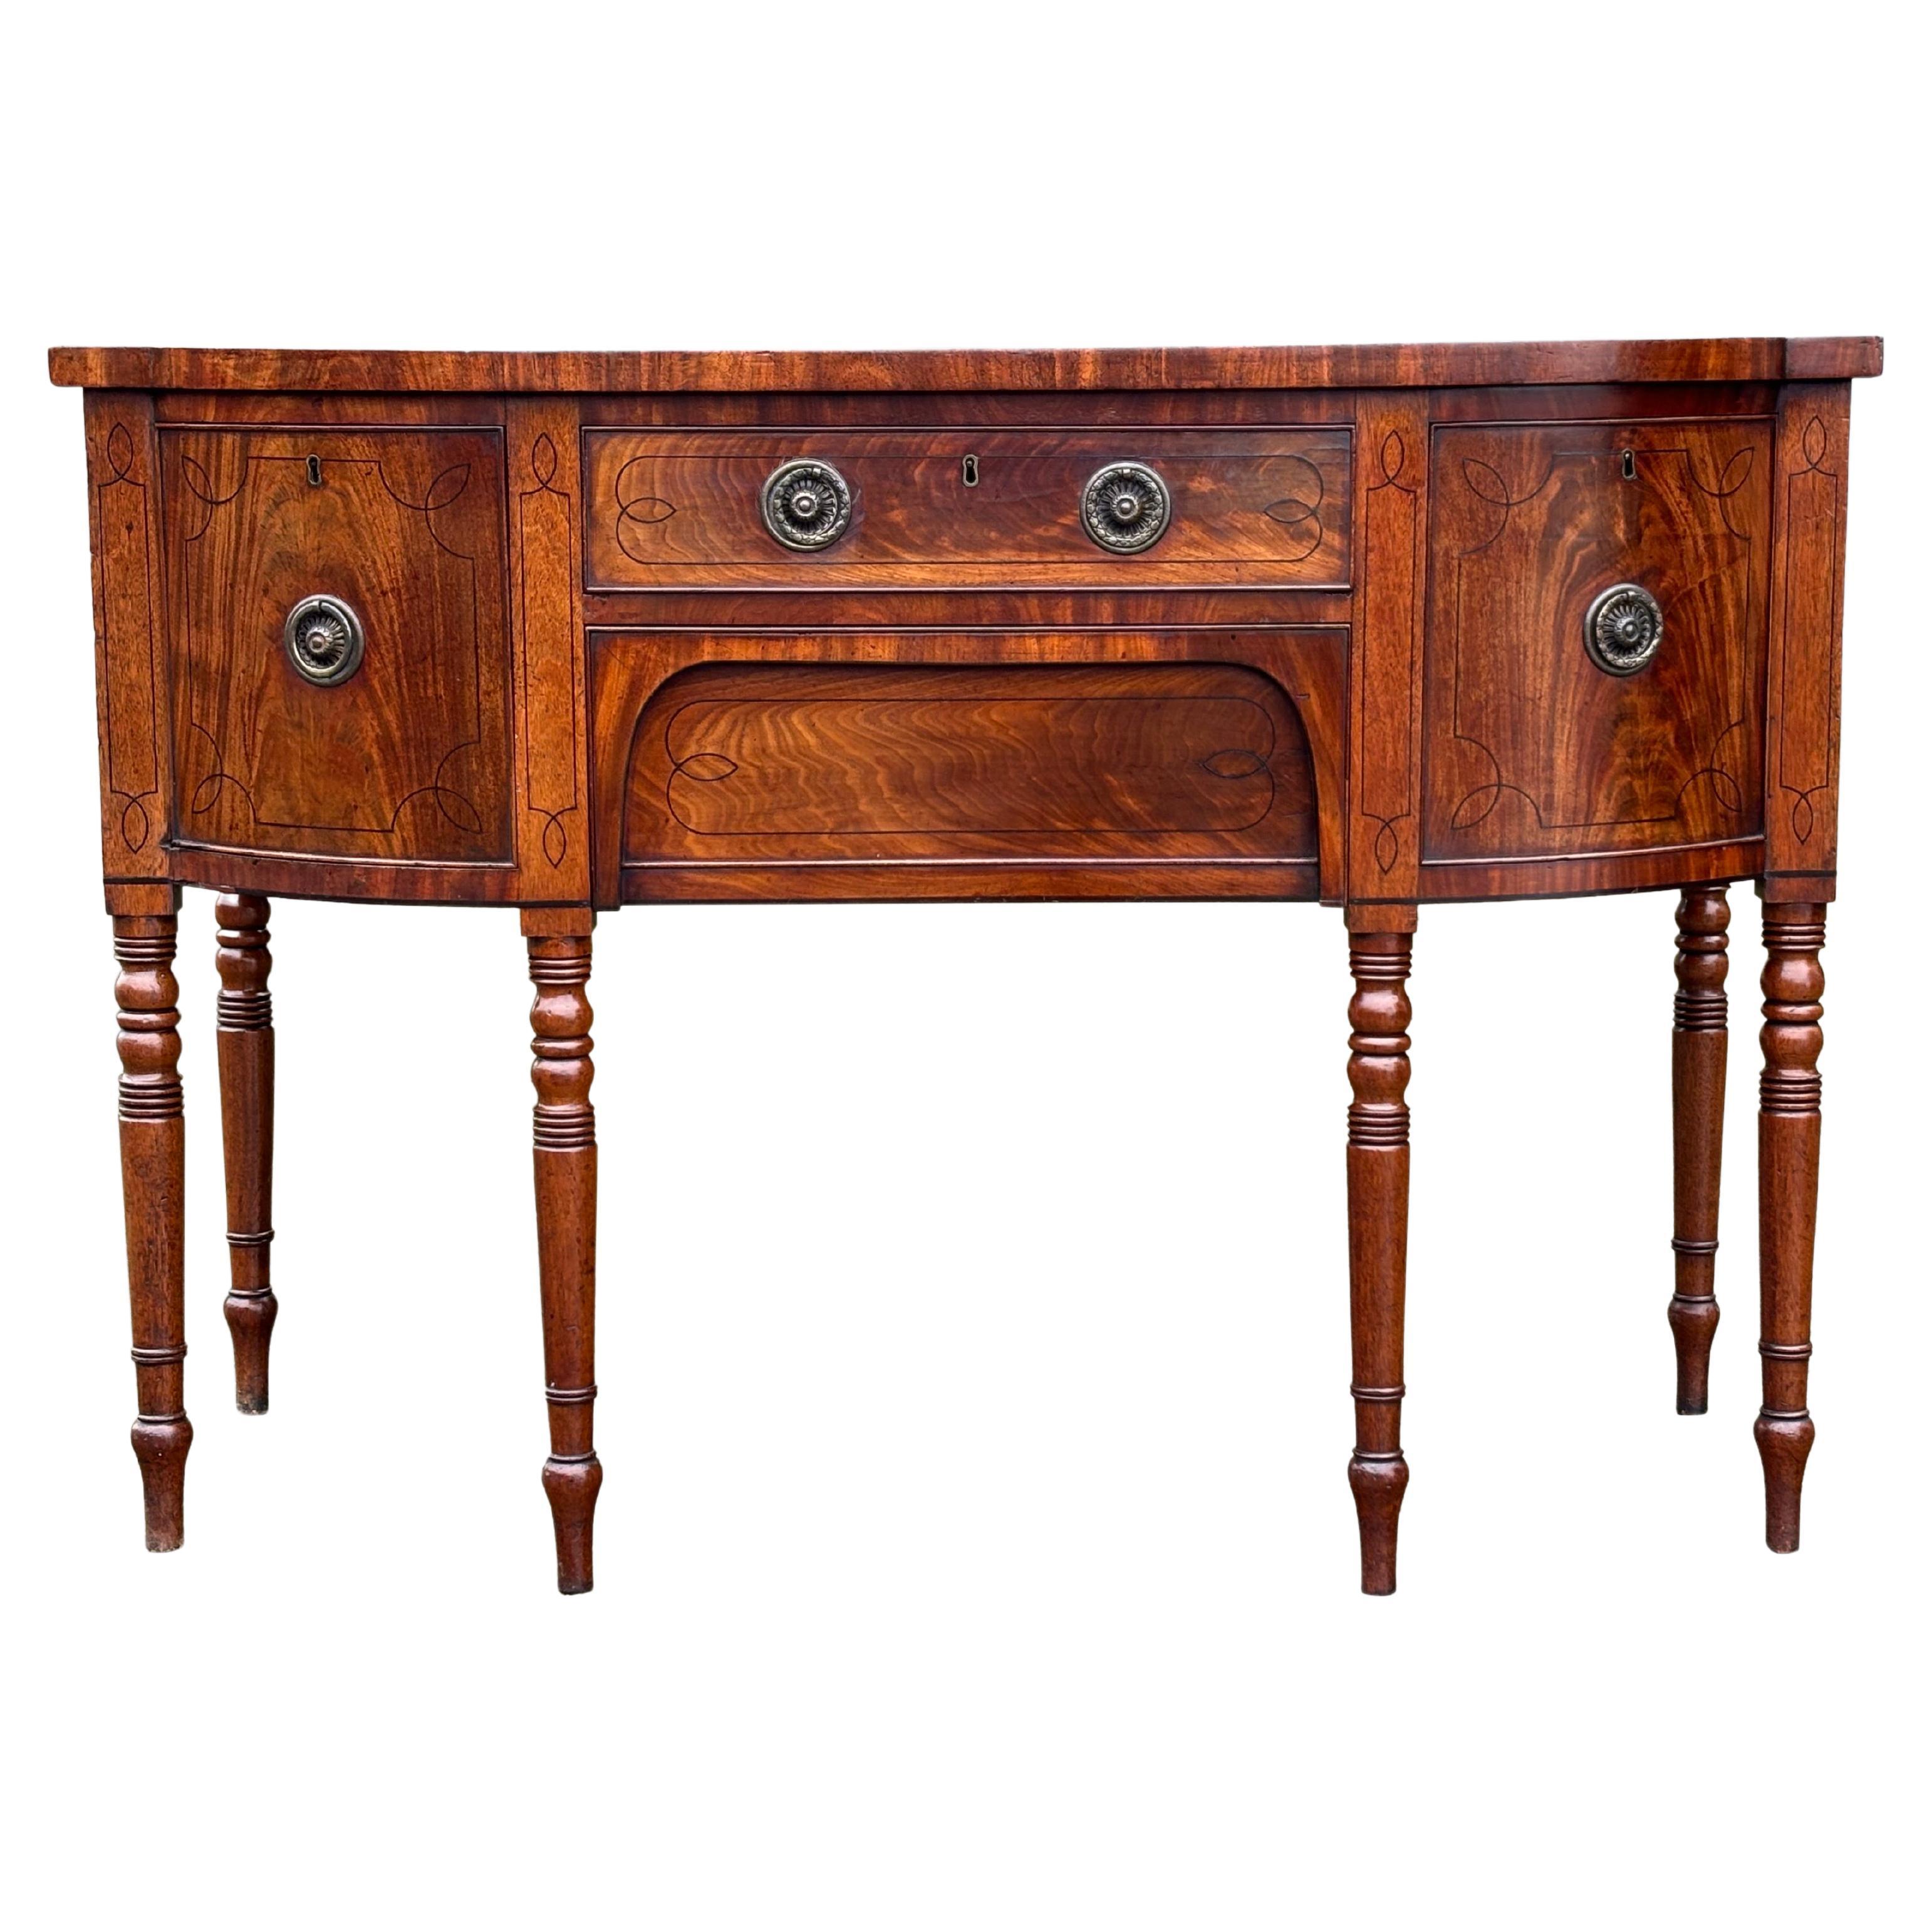 Early 19th Century George III Period Sideboard For Sale